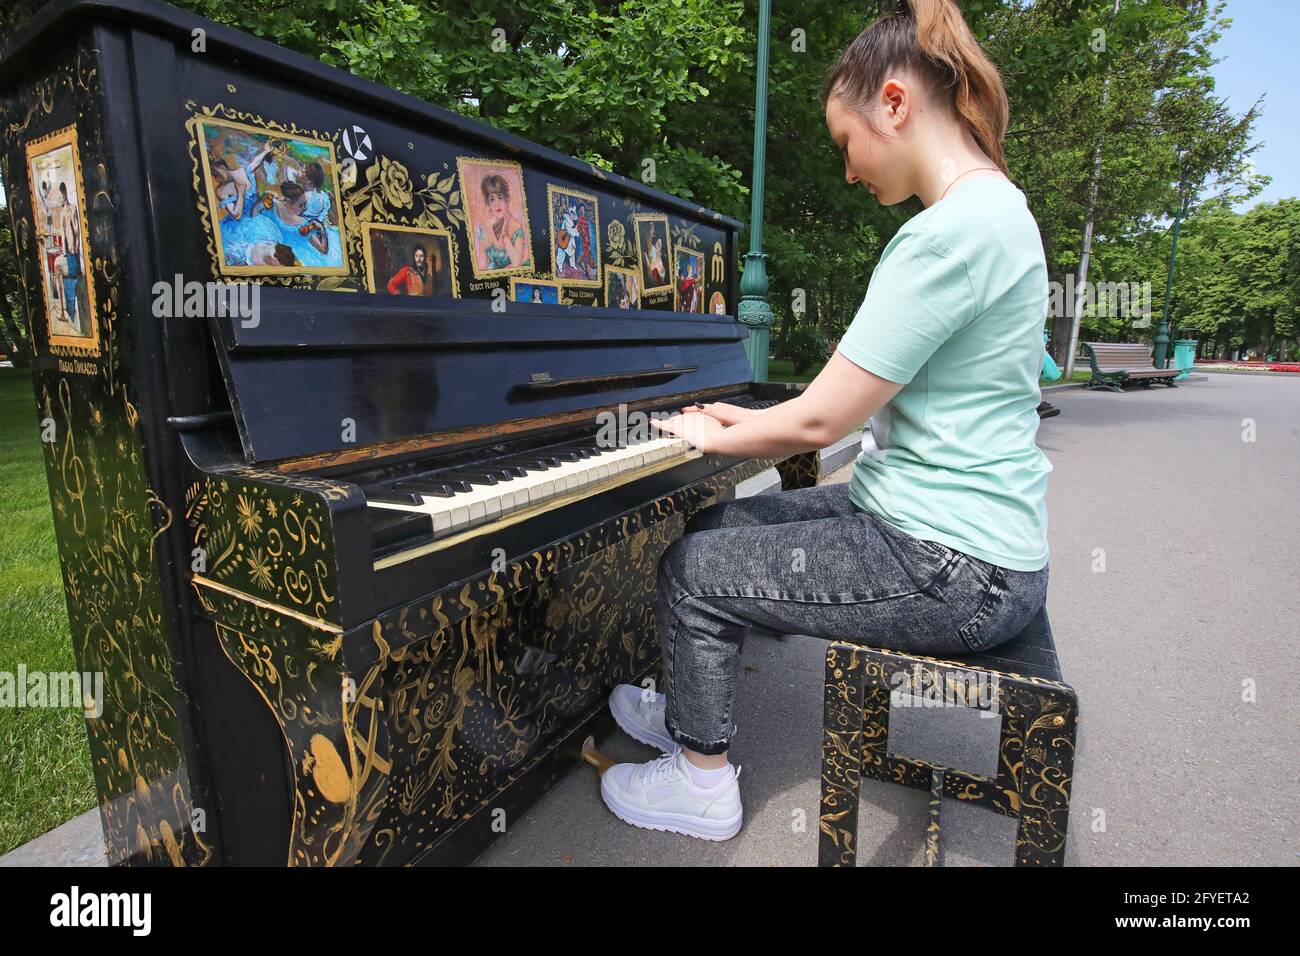 KHARKIV, UKRAINE - MAY 27, 2021 - A woman plays one of the 10 painted pianos  installed as part of the Art Piano project on the street in Kharkiv, nort  Stock Photo - Alamy